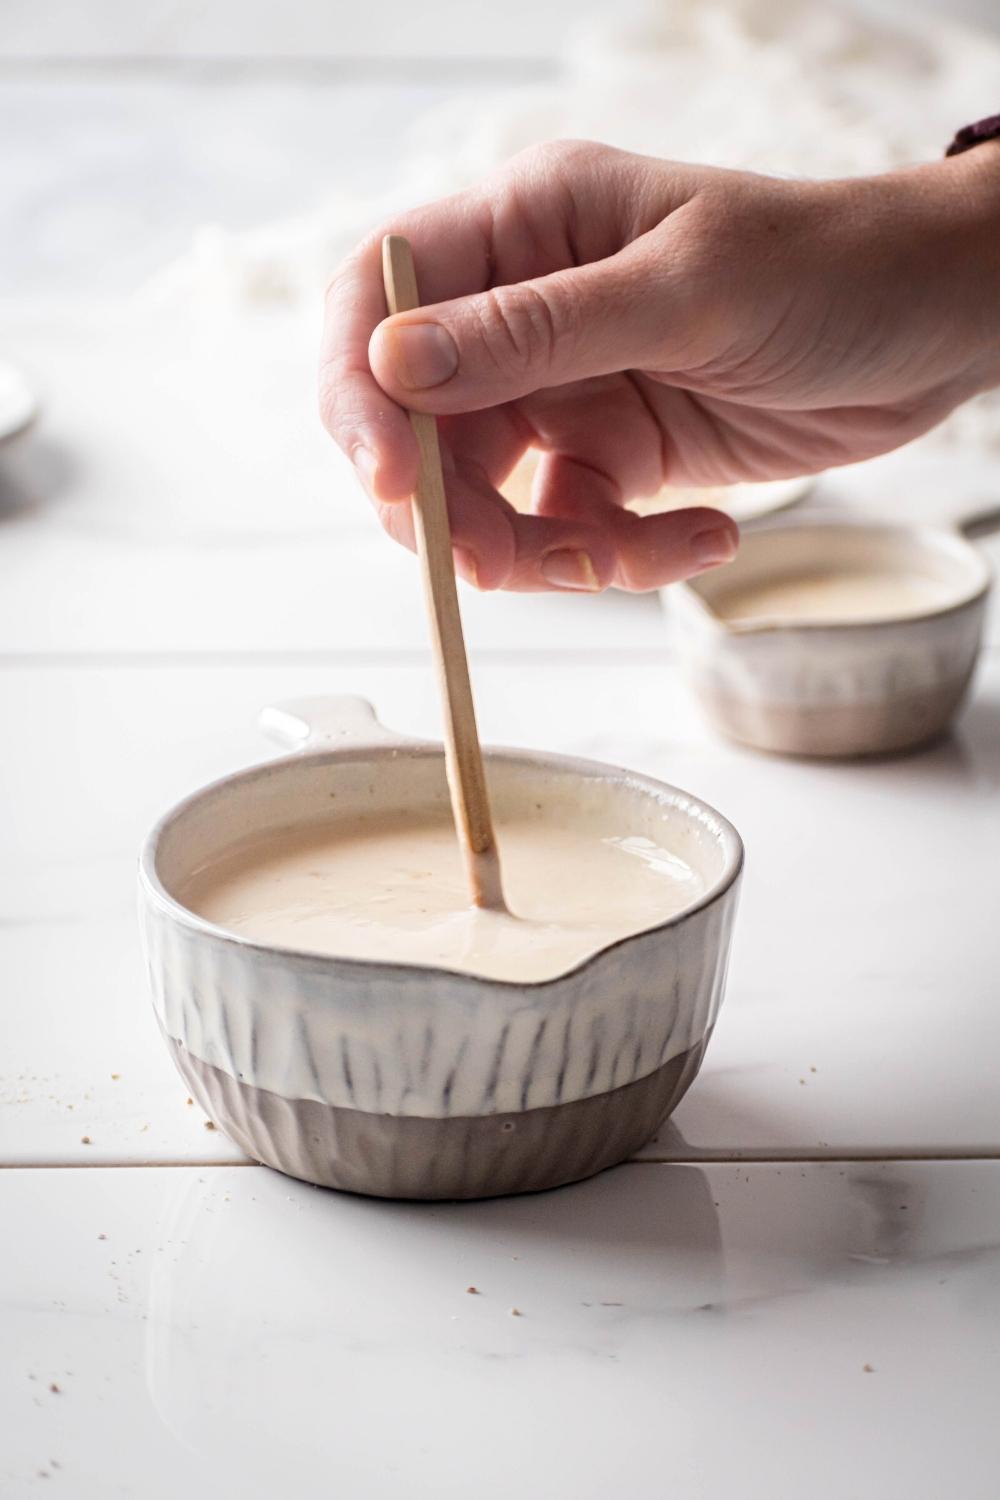 A hand holding a wooden spoon that is submerged in a bowl filled with keto white gravy.